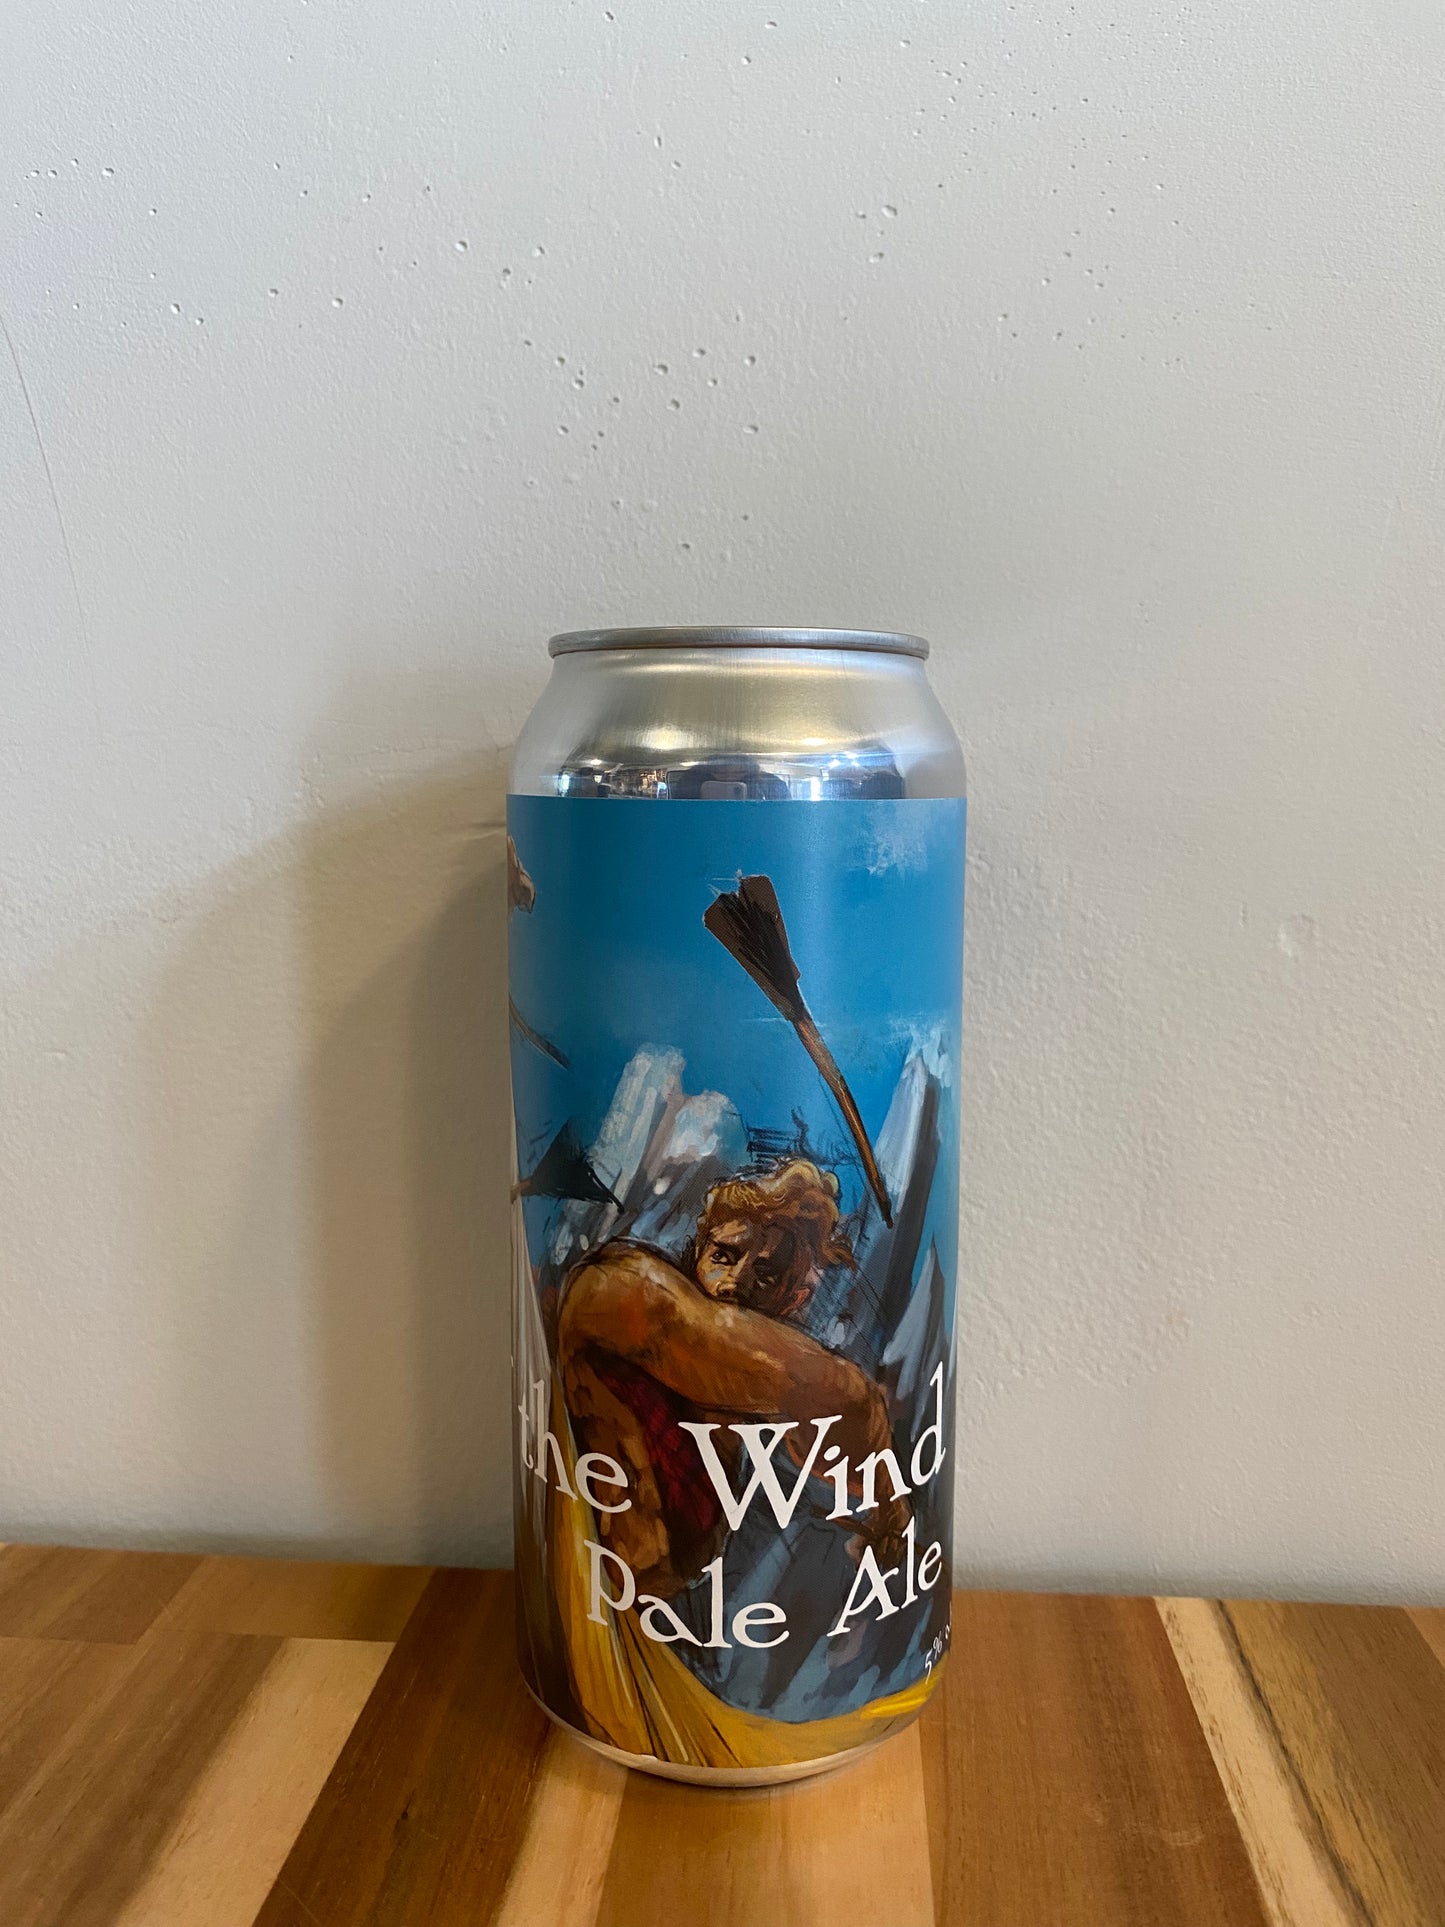 CHRONICLE BREWING STEP OF THE WIND - PALE ALE 473mL